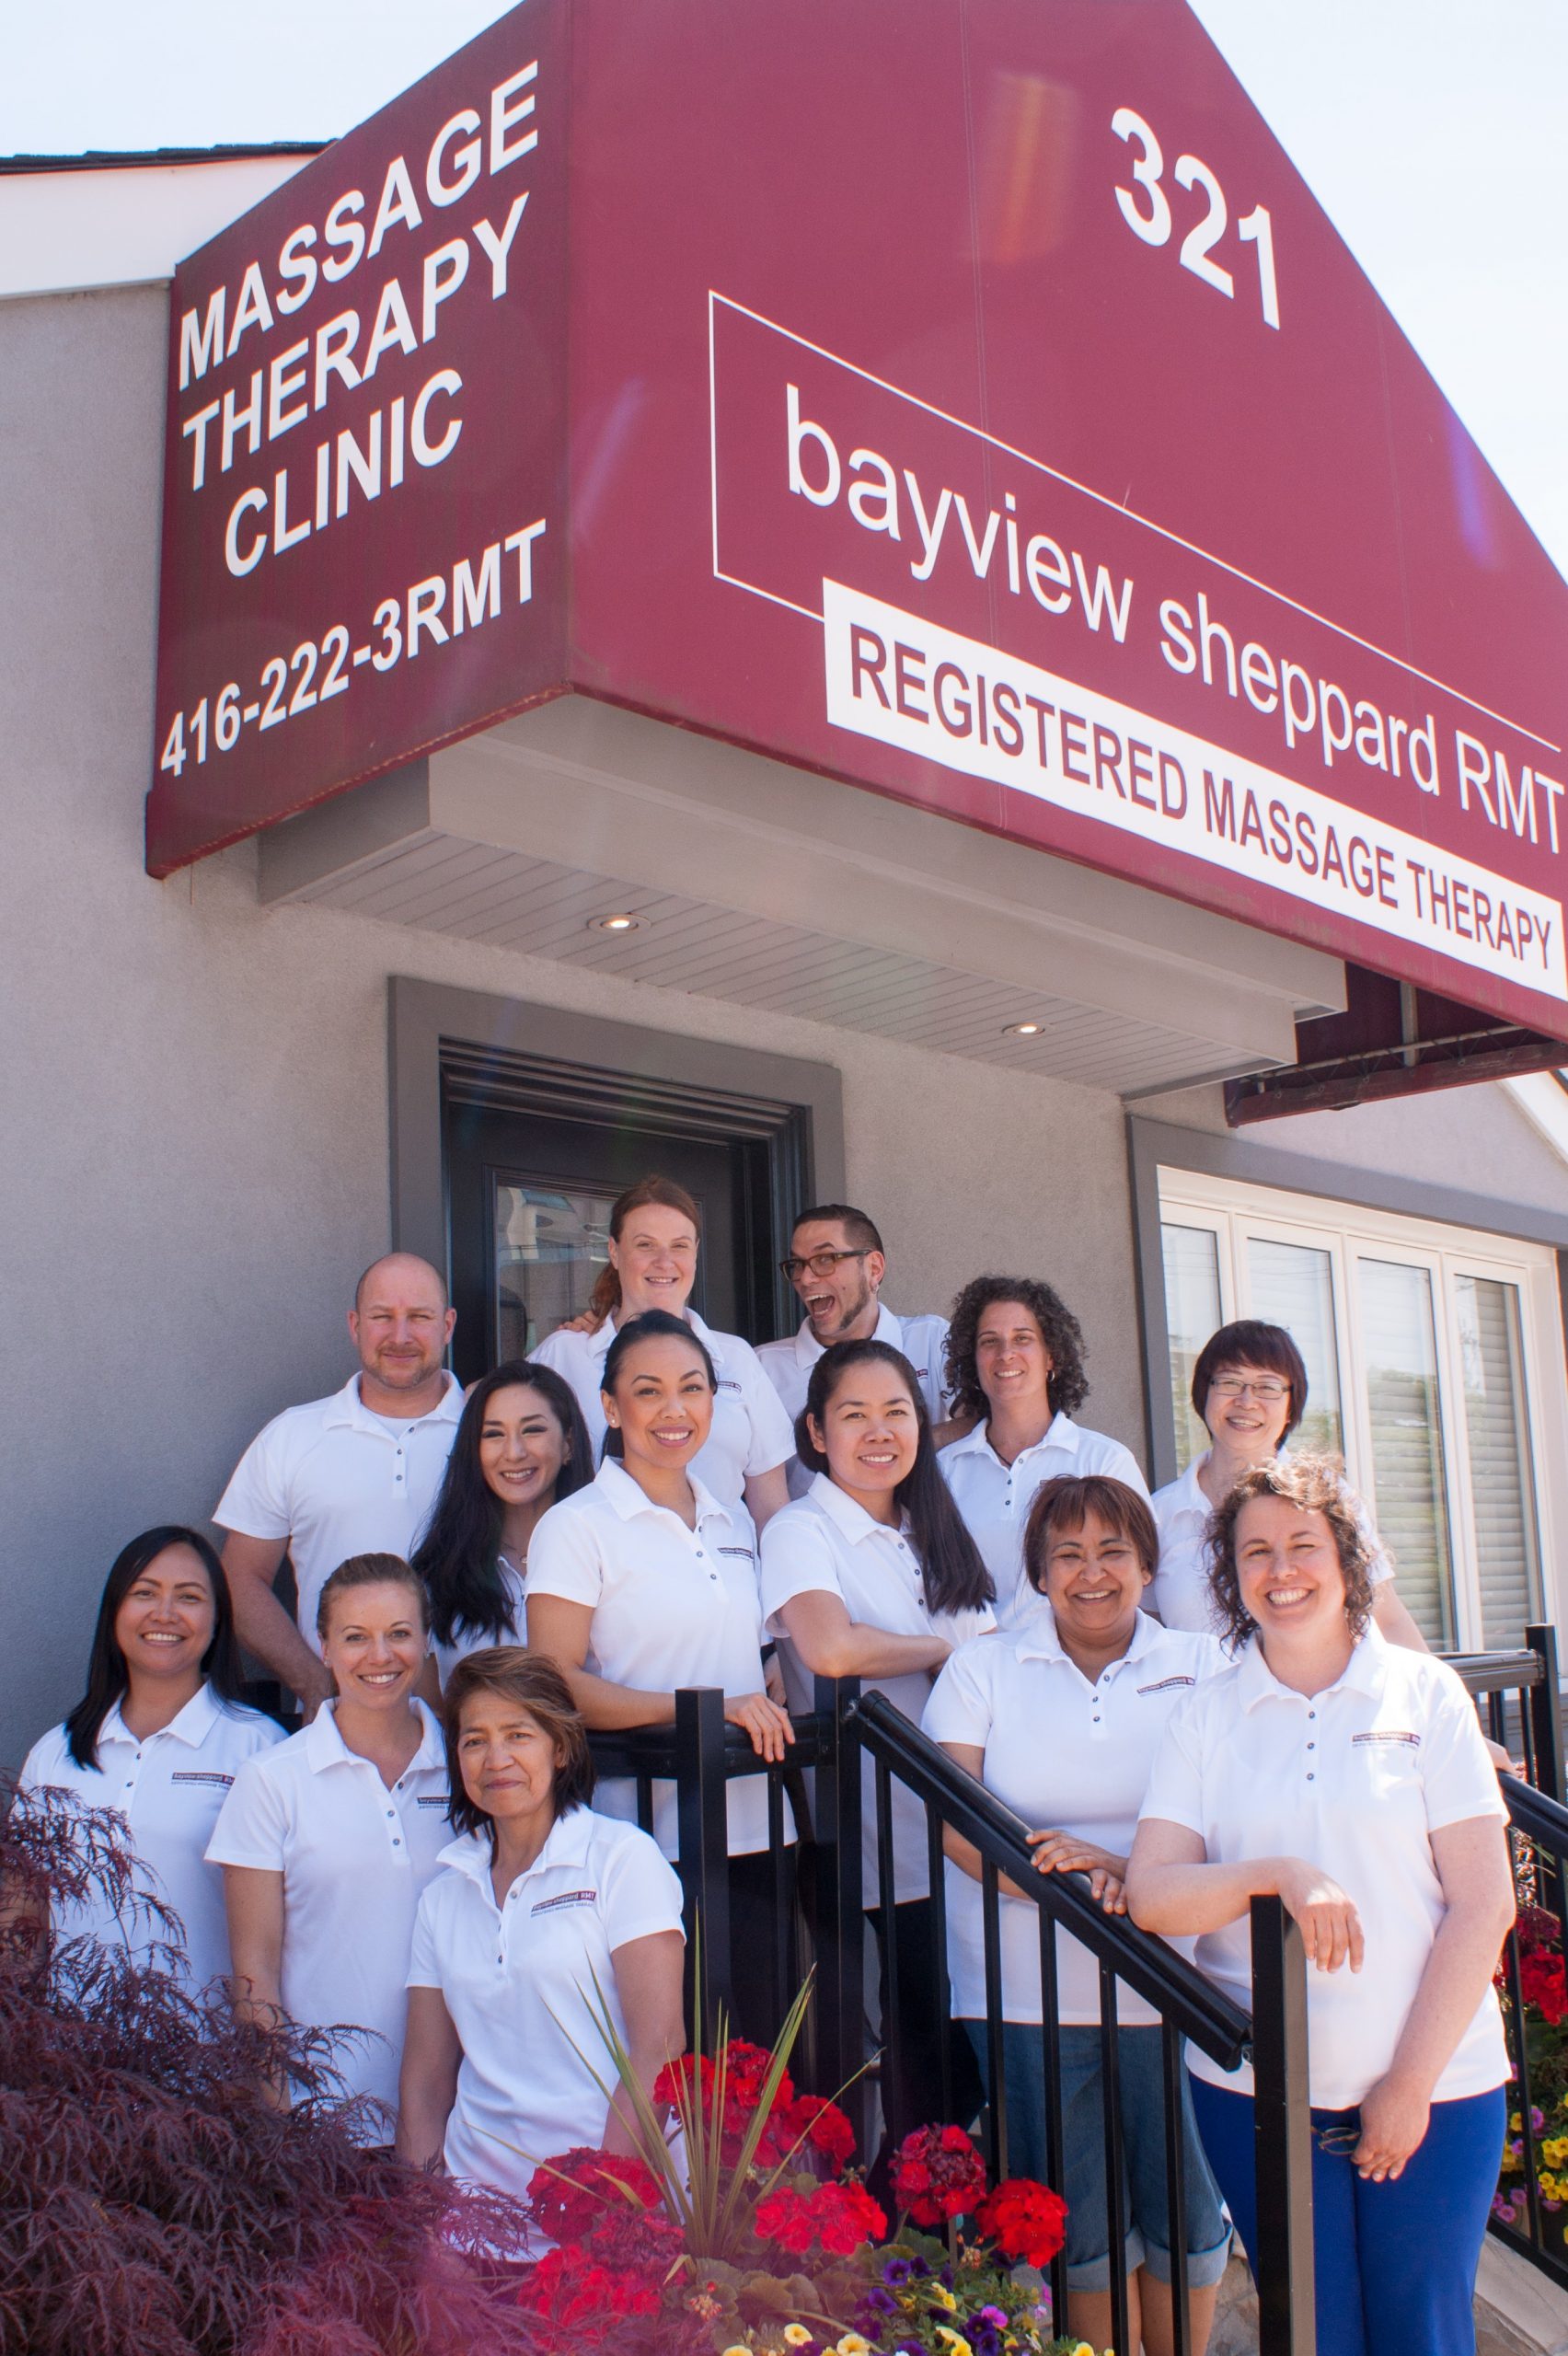 Our Team Bayview Sheppard Registered Massage Therapy 